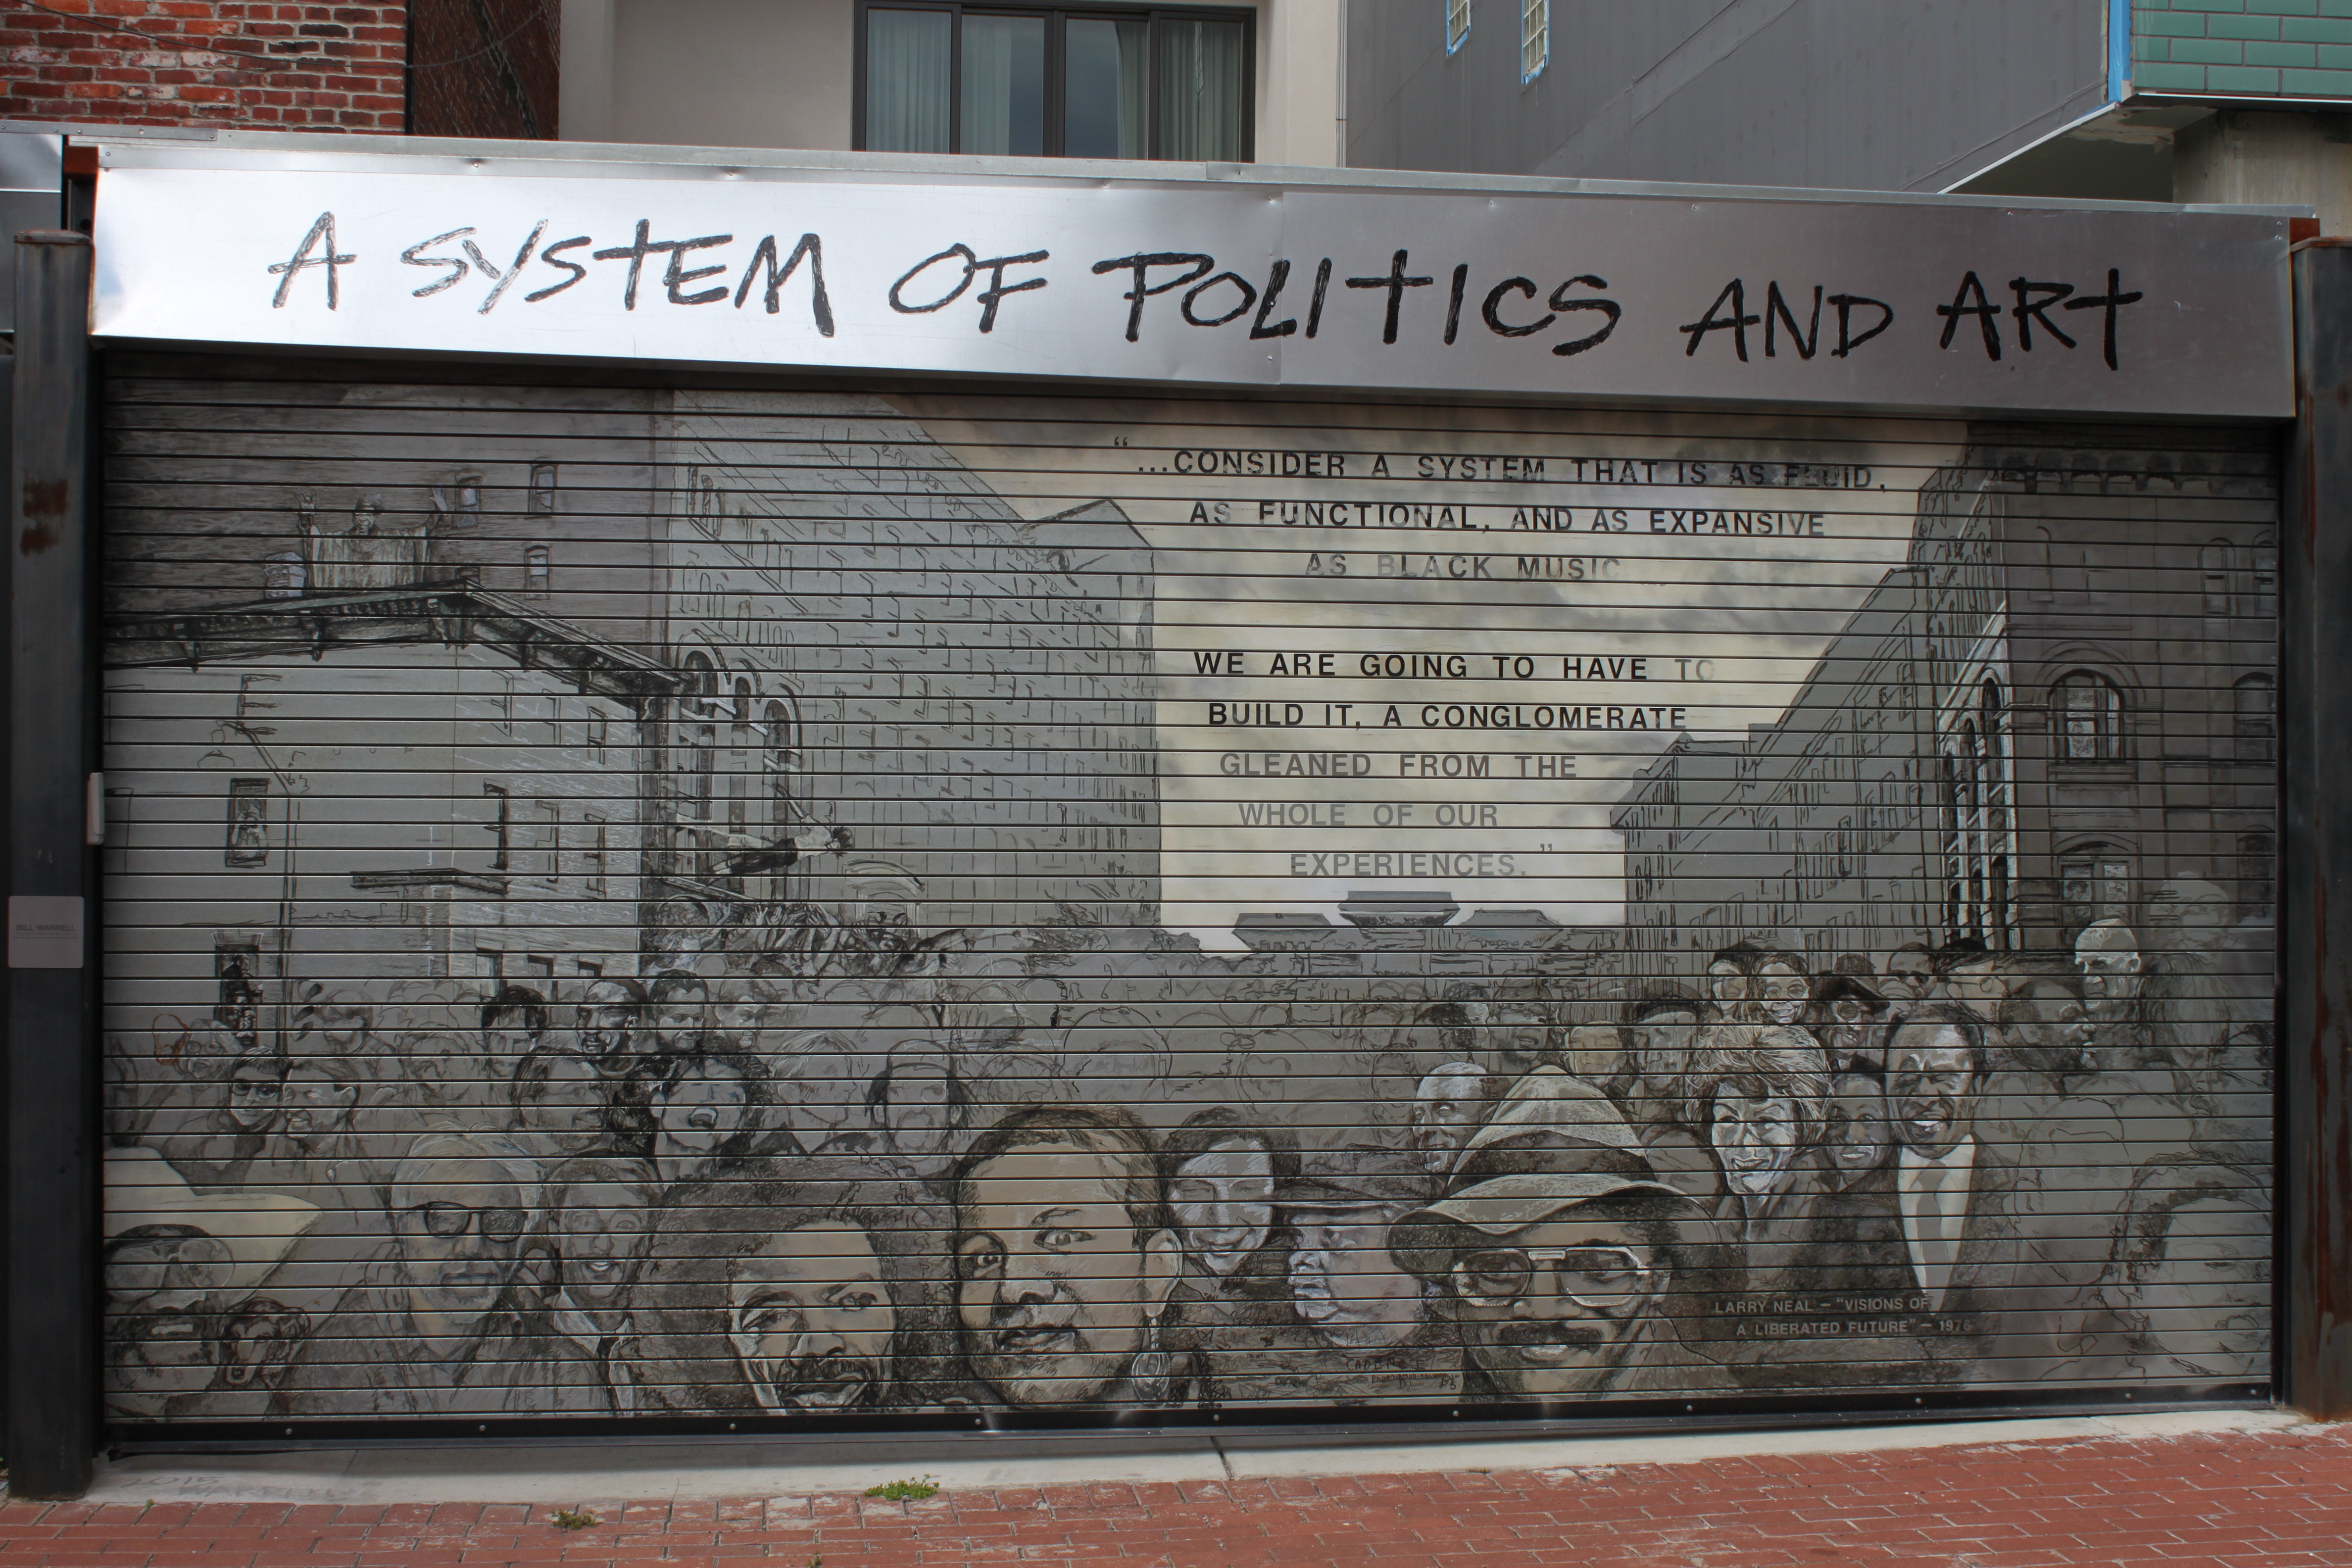 "A System of Politics and Art" by Bill Warrell.